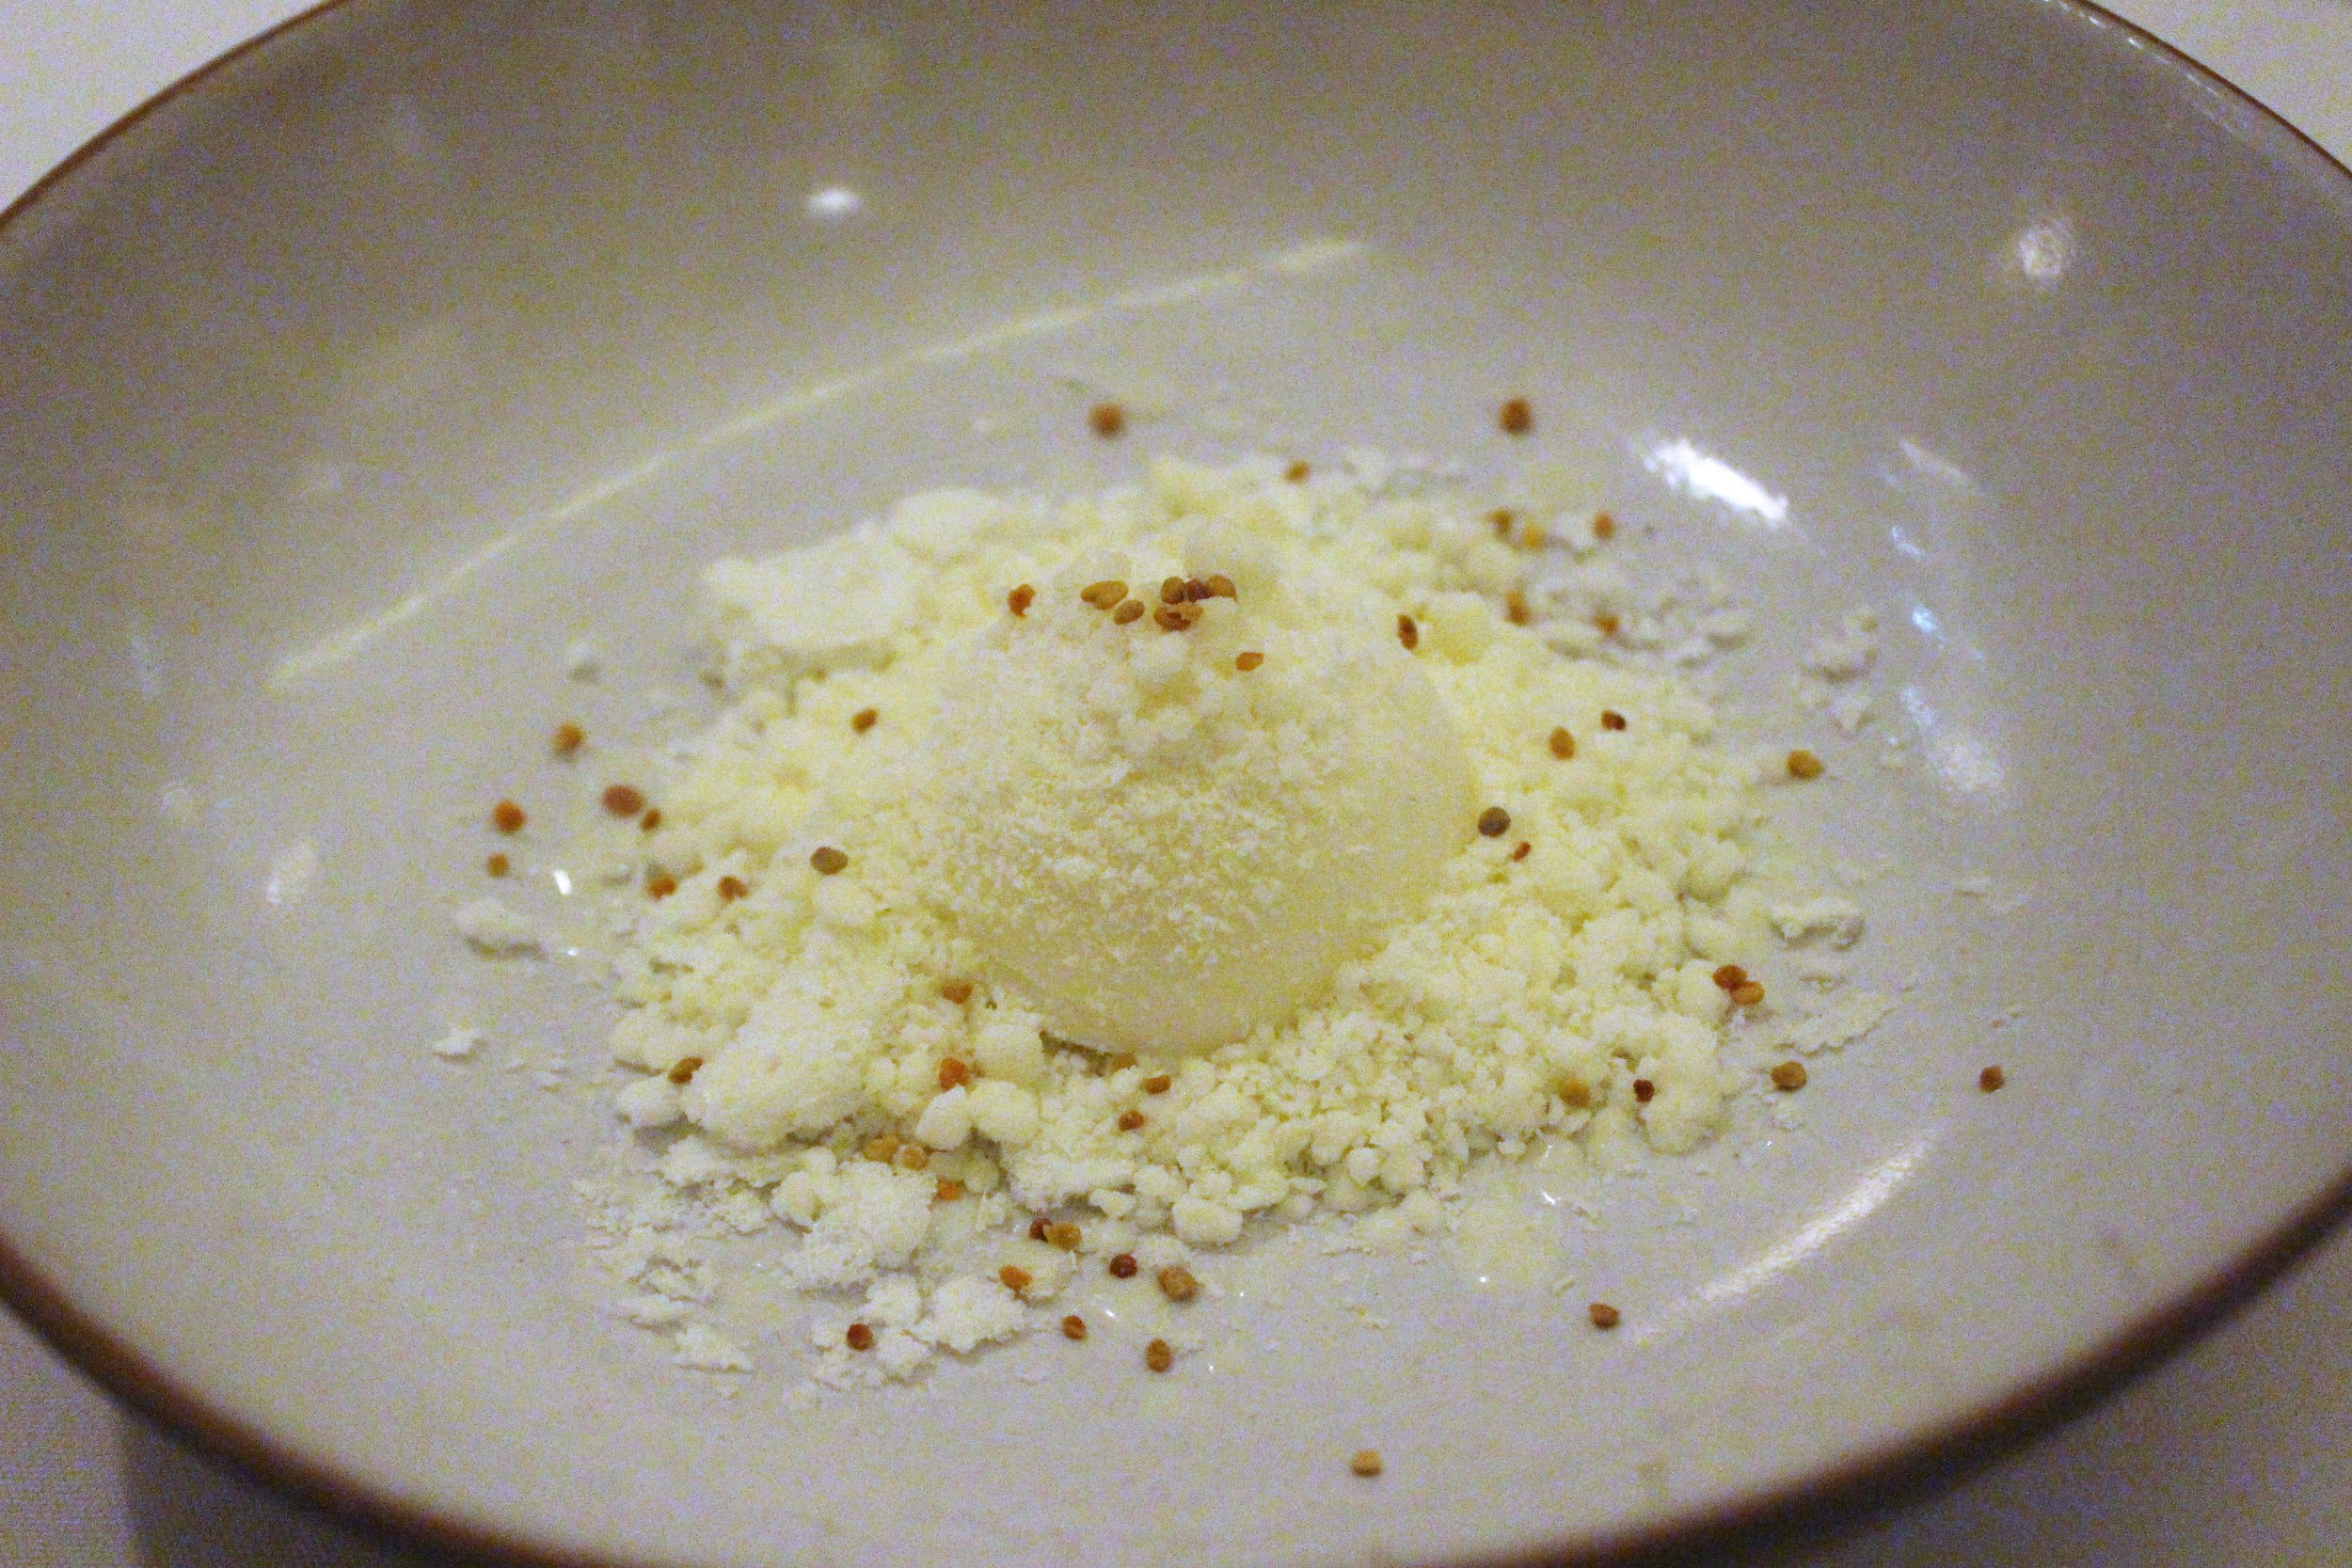 2010 Milk and Honey with Dehydrated Milk Foam and Bee Pollen at EMP in New York City